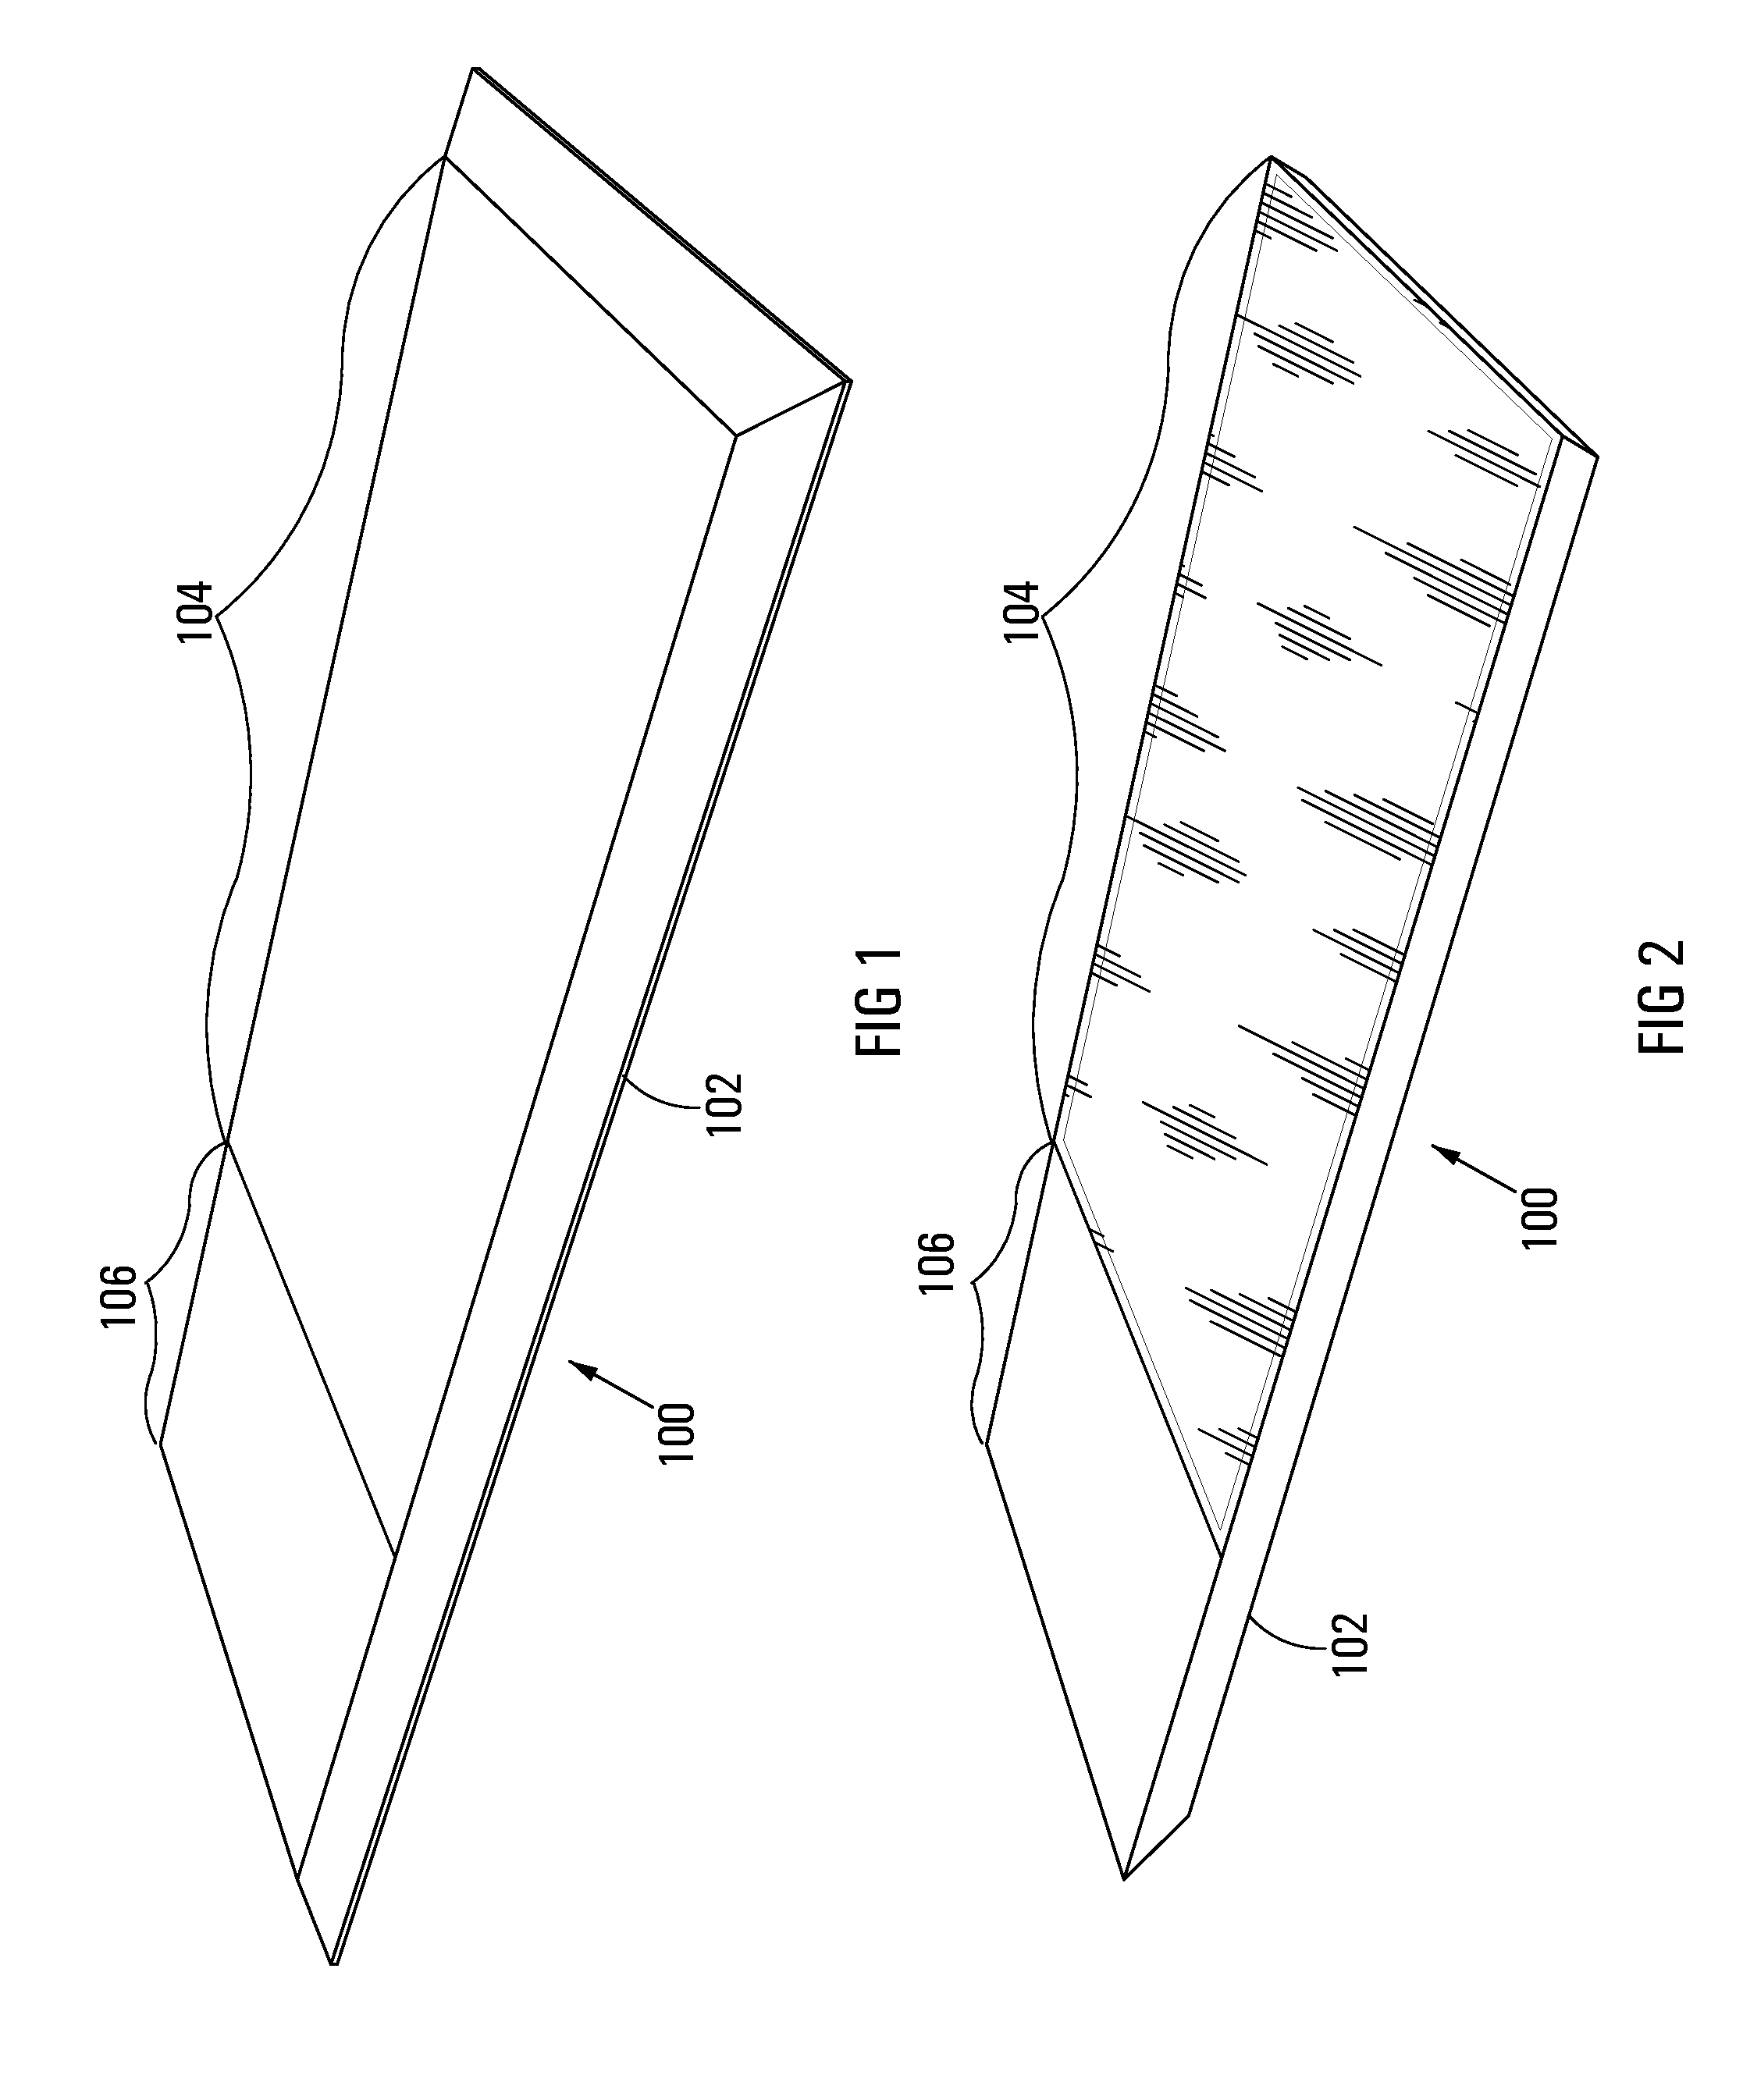 Flat panel electronic display arrangement for attachment to a transparent base structure